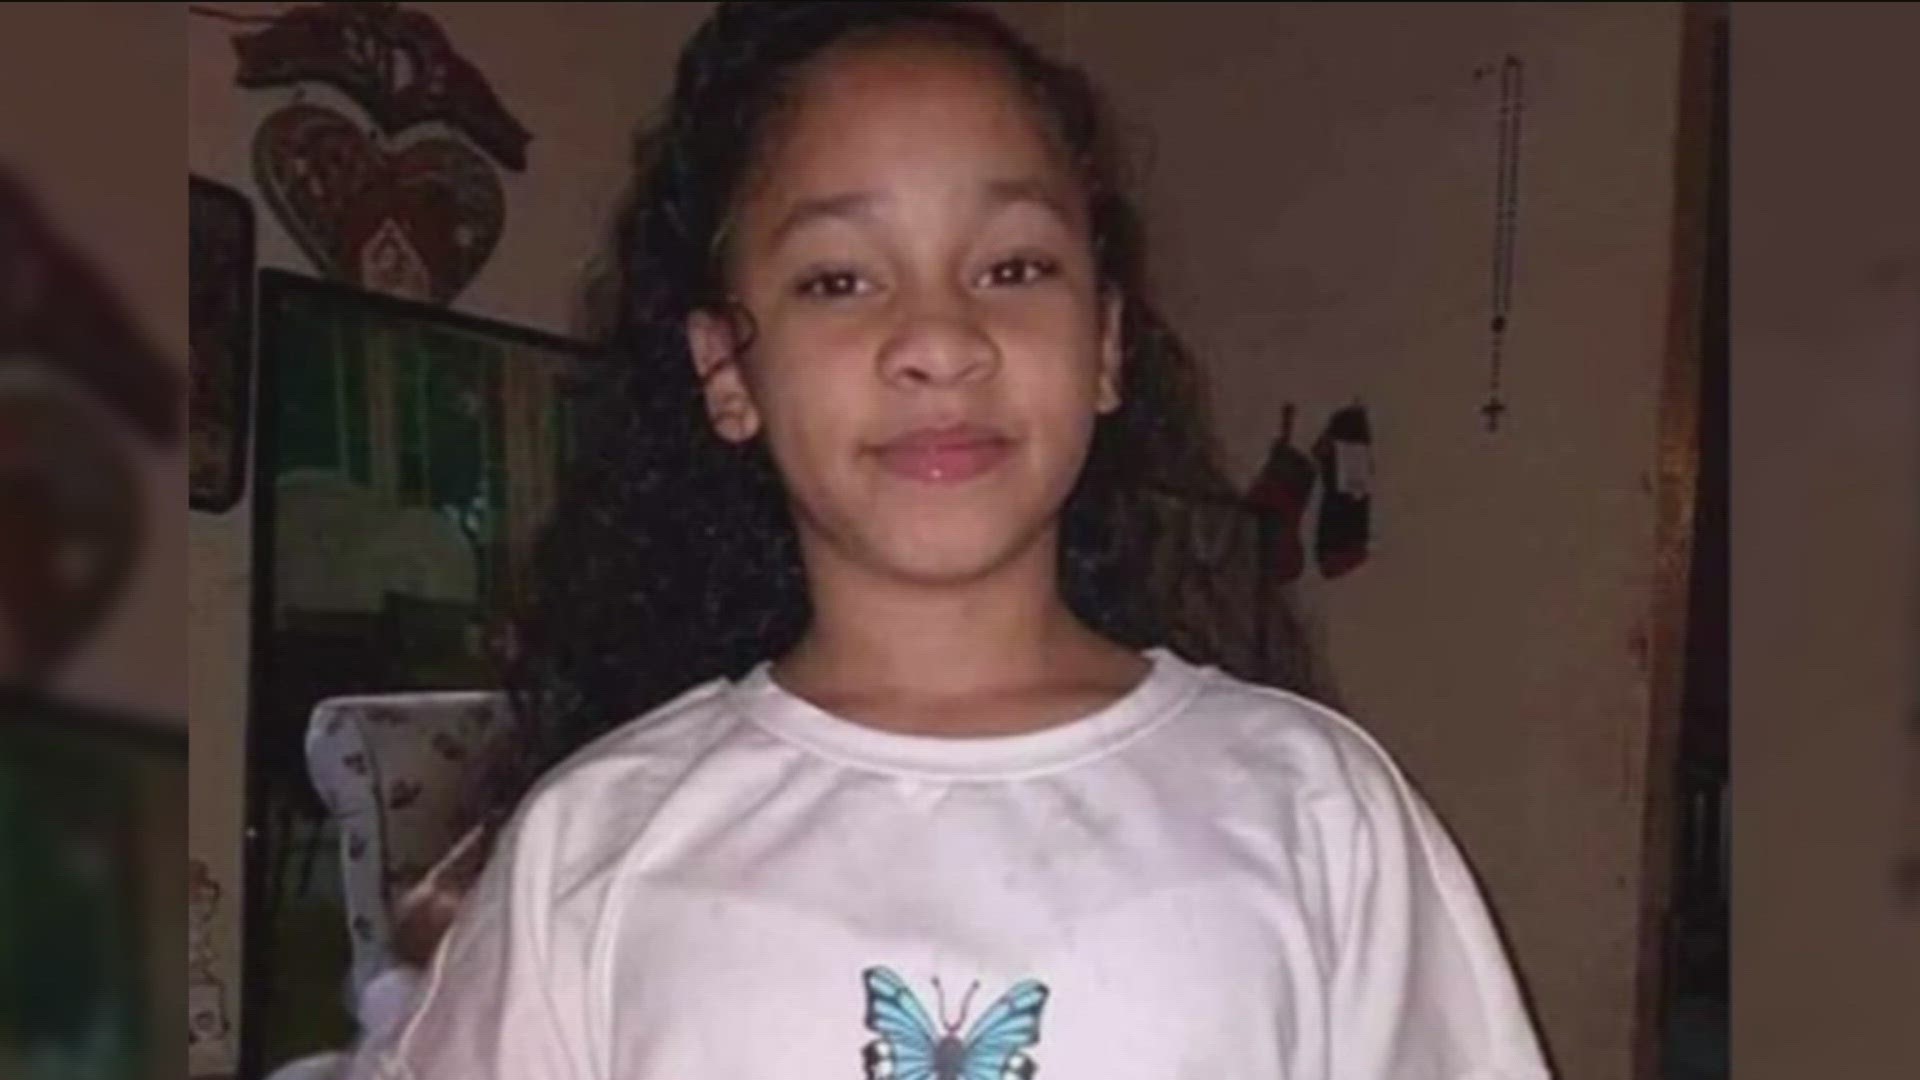 Jaylah Perry's family decided to donate her organs through Life Connection of Ohio and now six people in different states are recipients of a lifesaving gift.